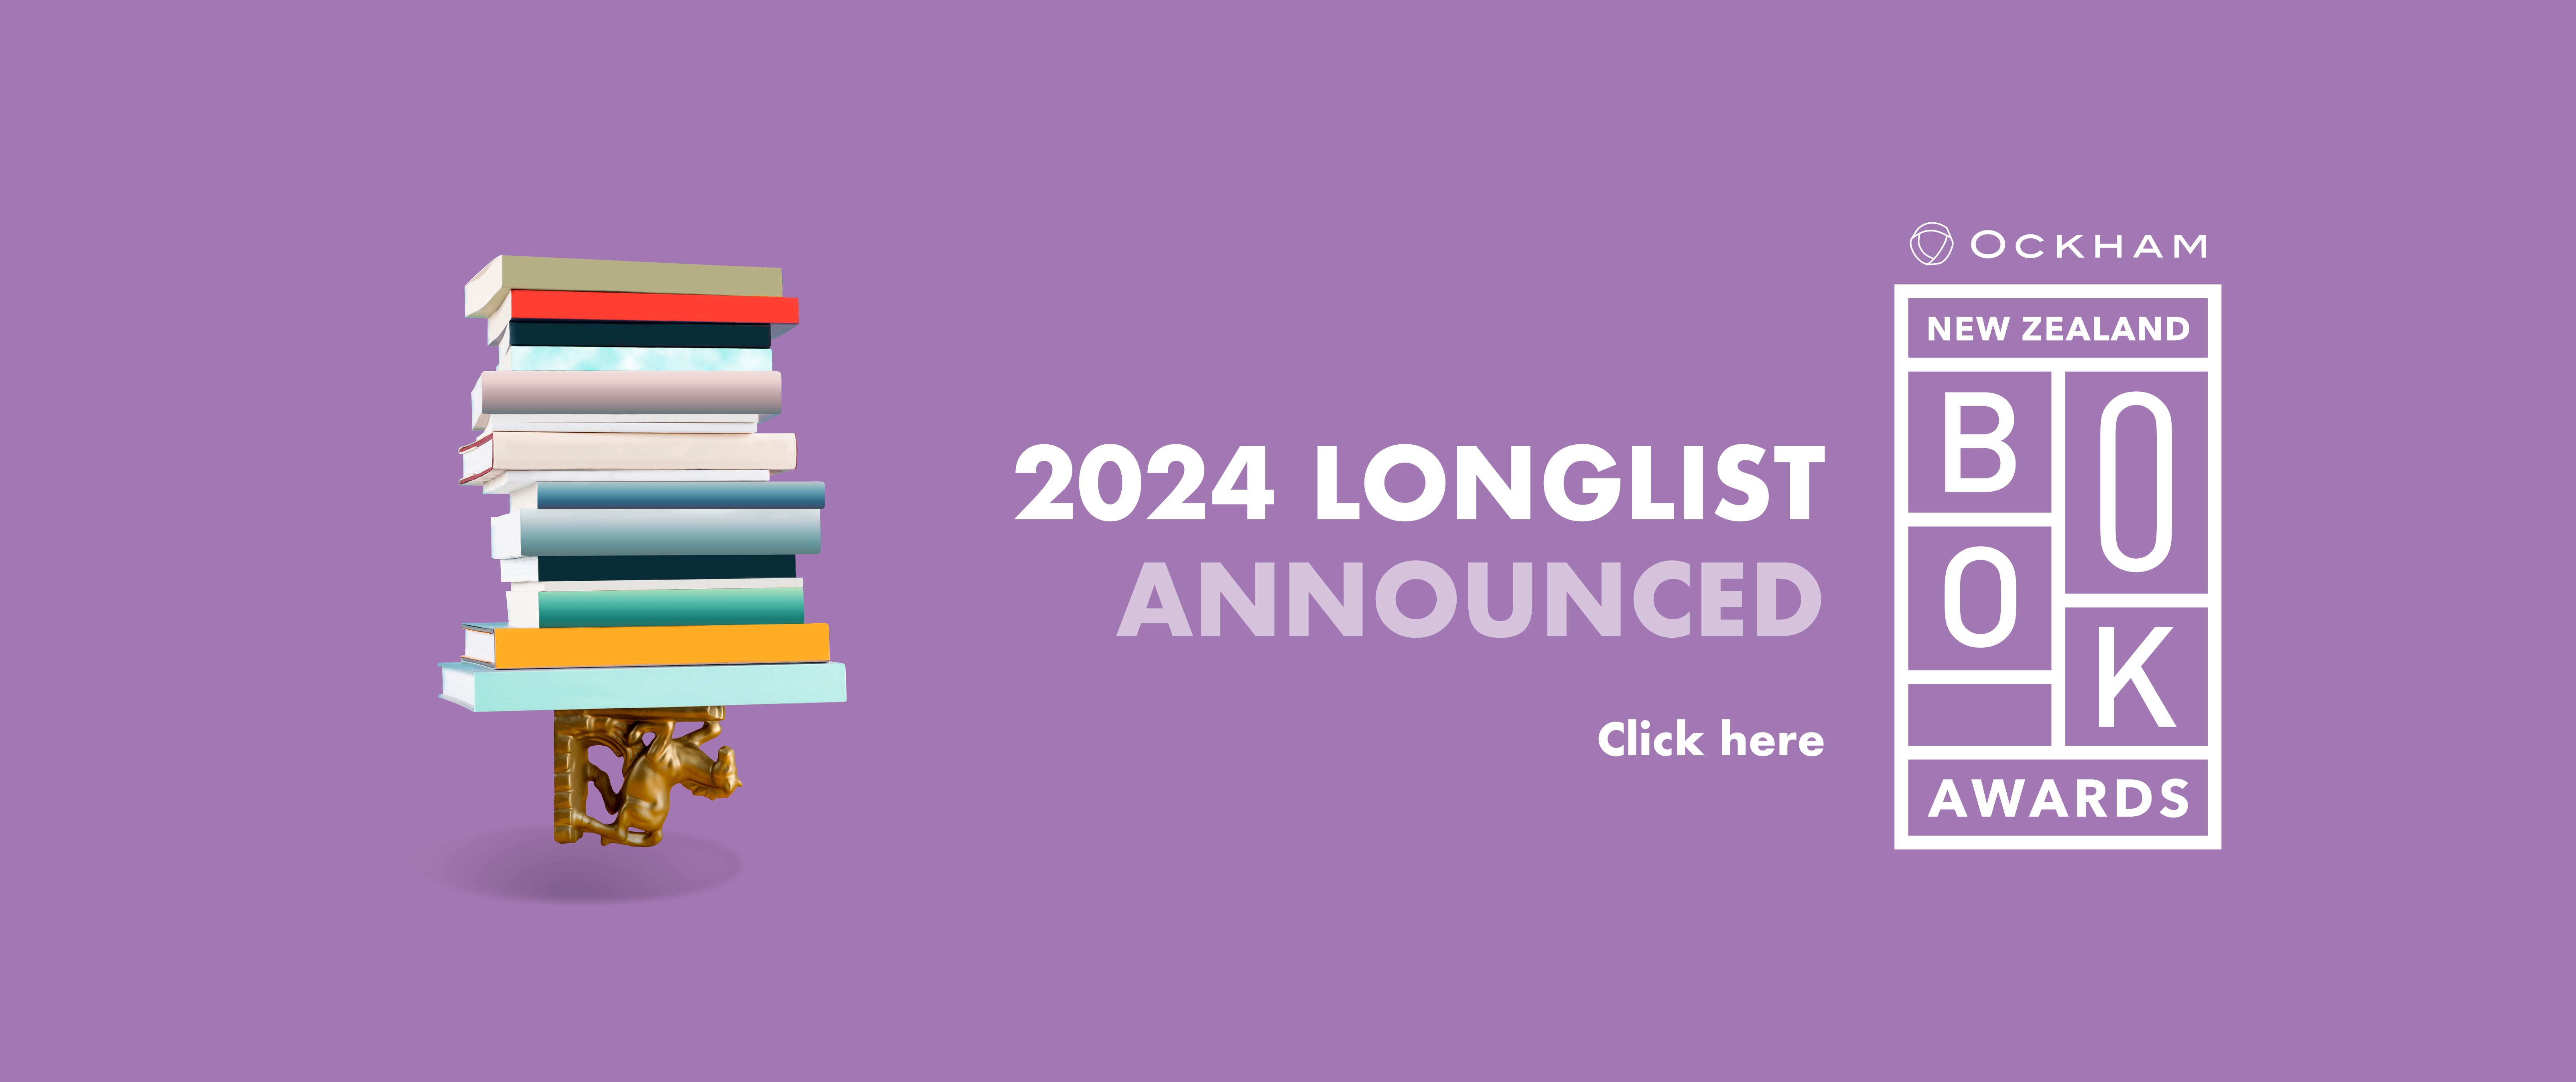 2024 Longlist announced - Click here